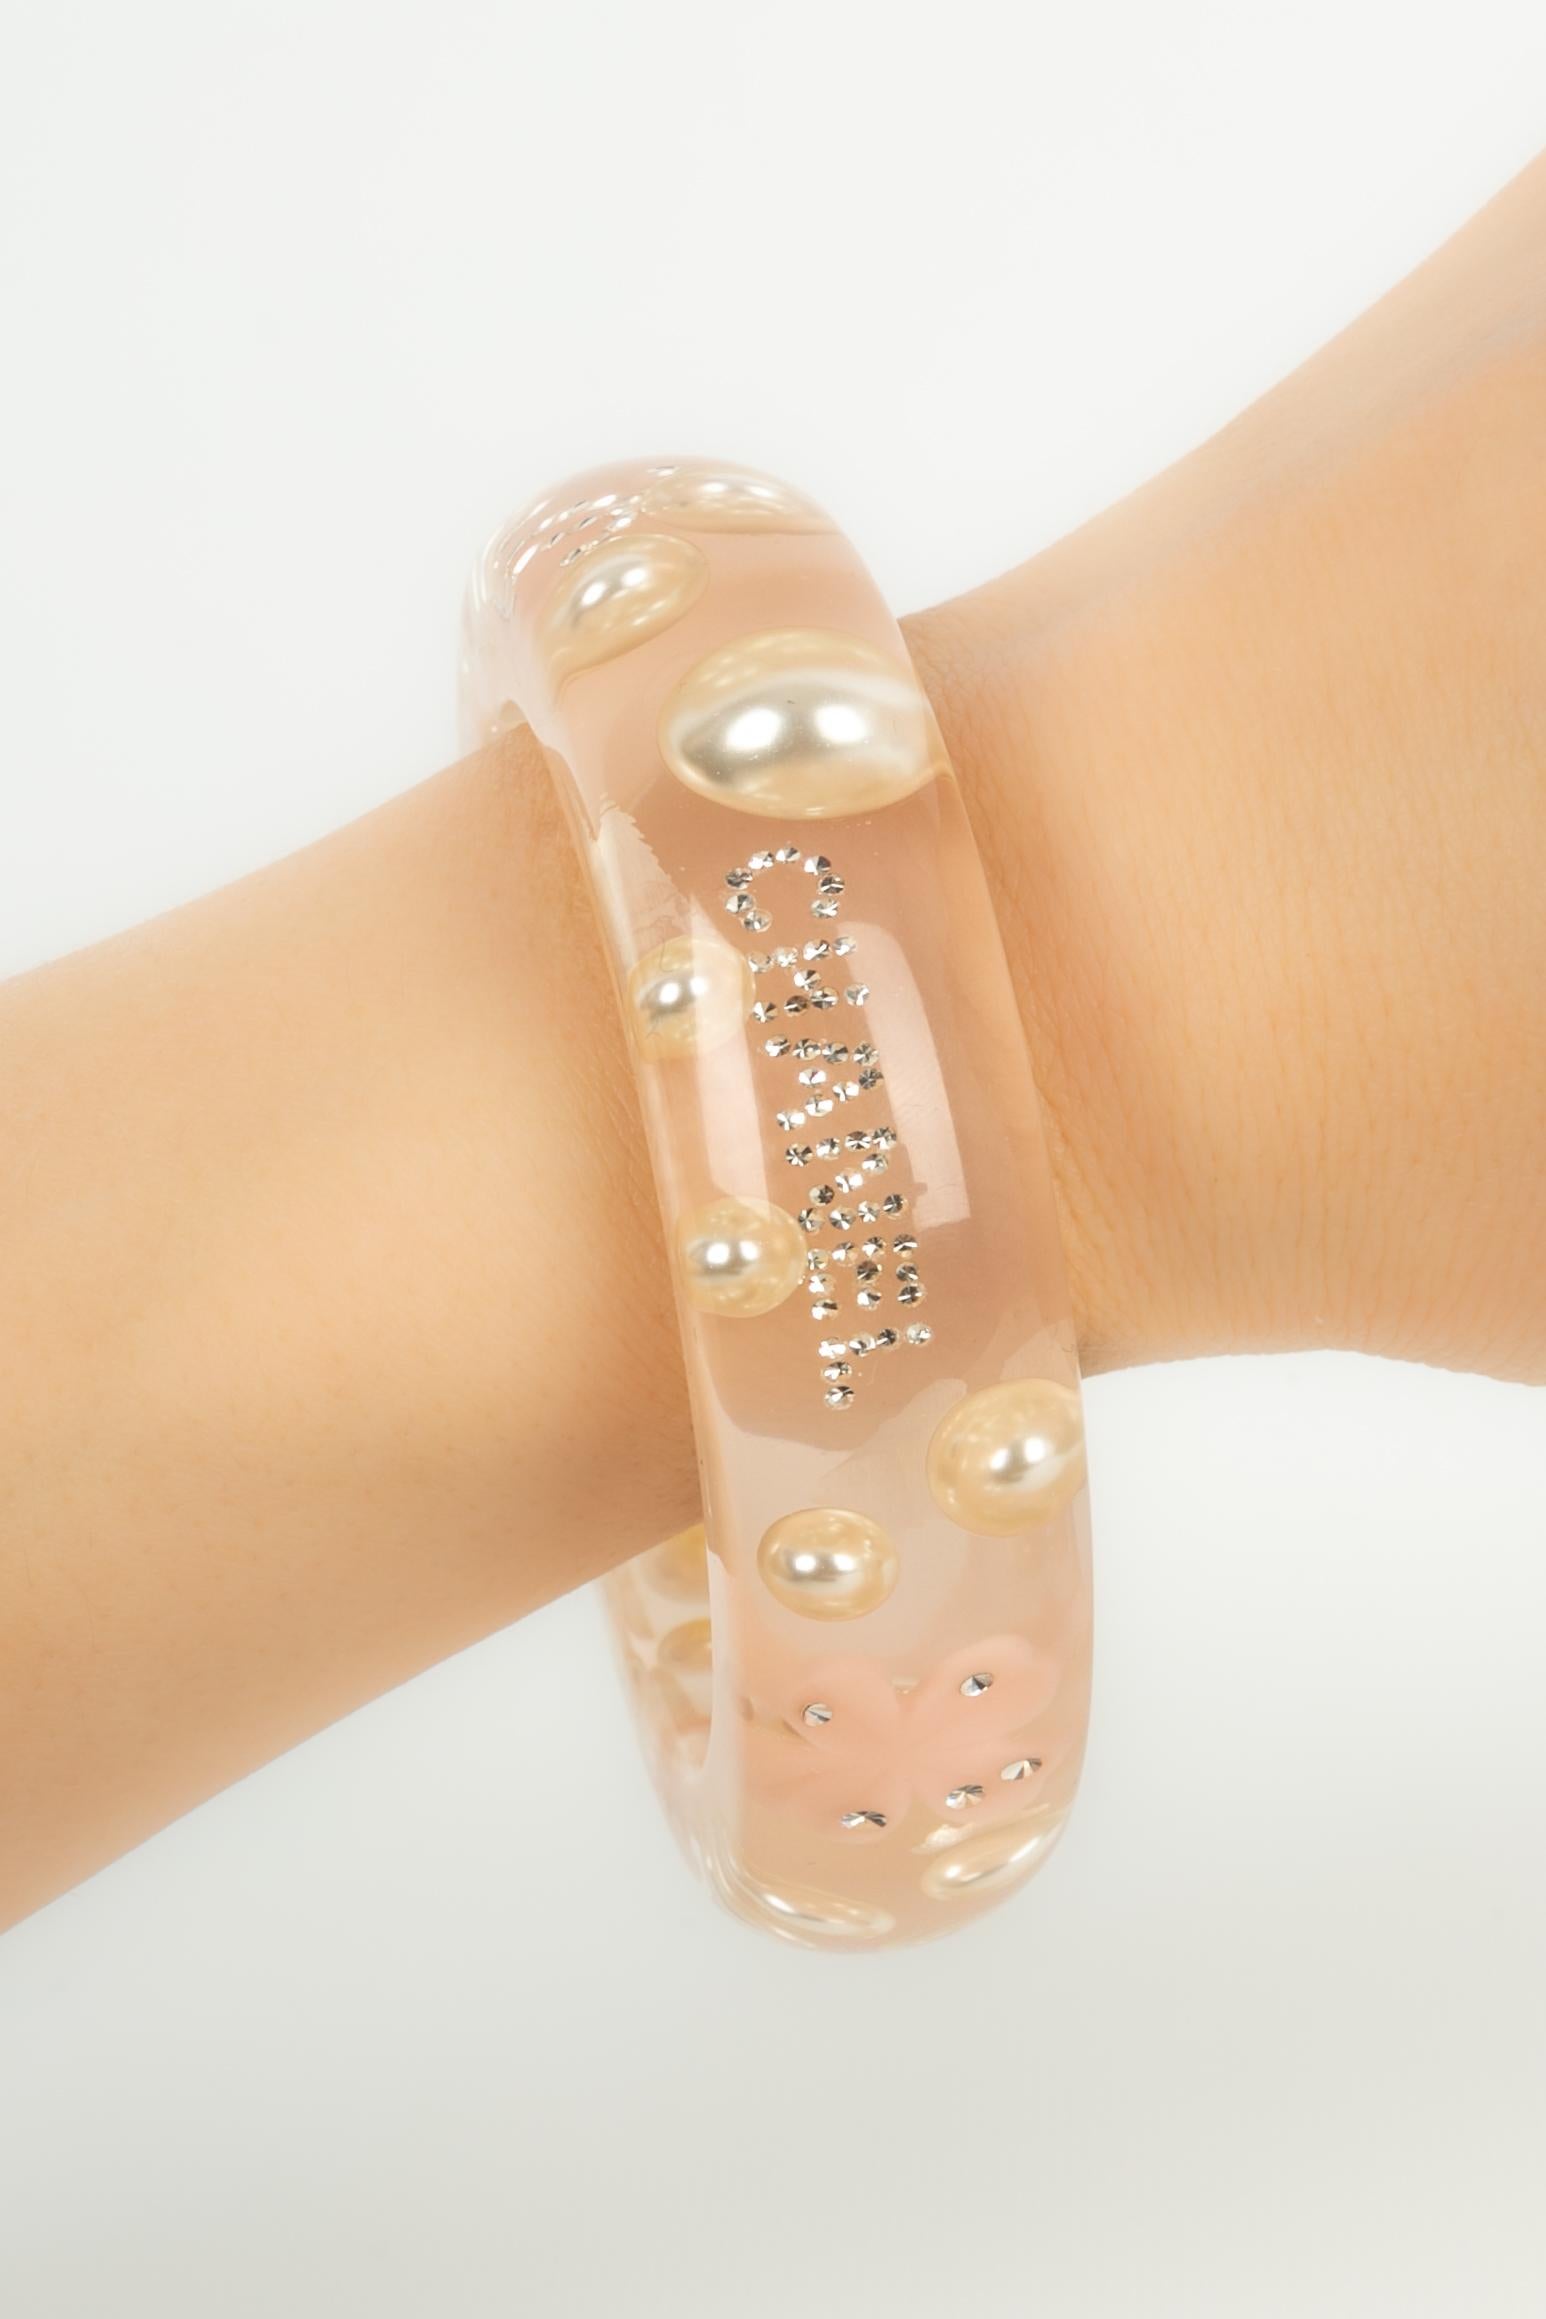 CHANEL - (Made in France) Lucite bracelet in shades of pink. Spring-Summer 2005 collection.

Condition :
Very good condition

Dimensions:
Circumference: 19 cm - Diameter: 6 cm